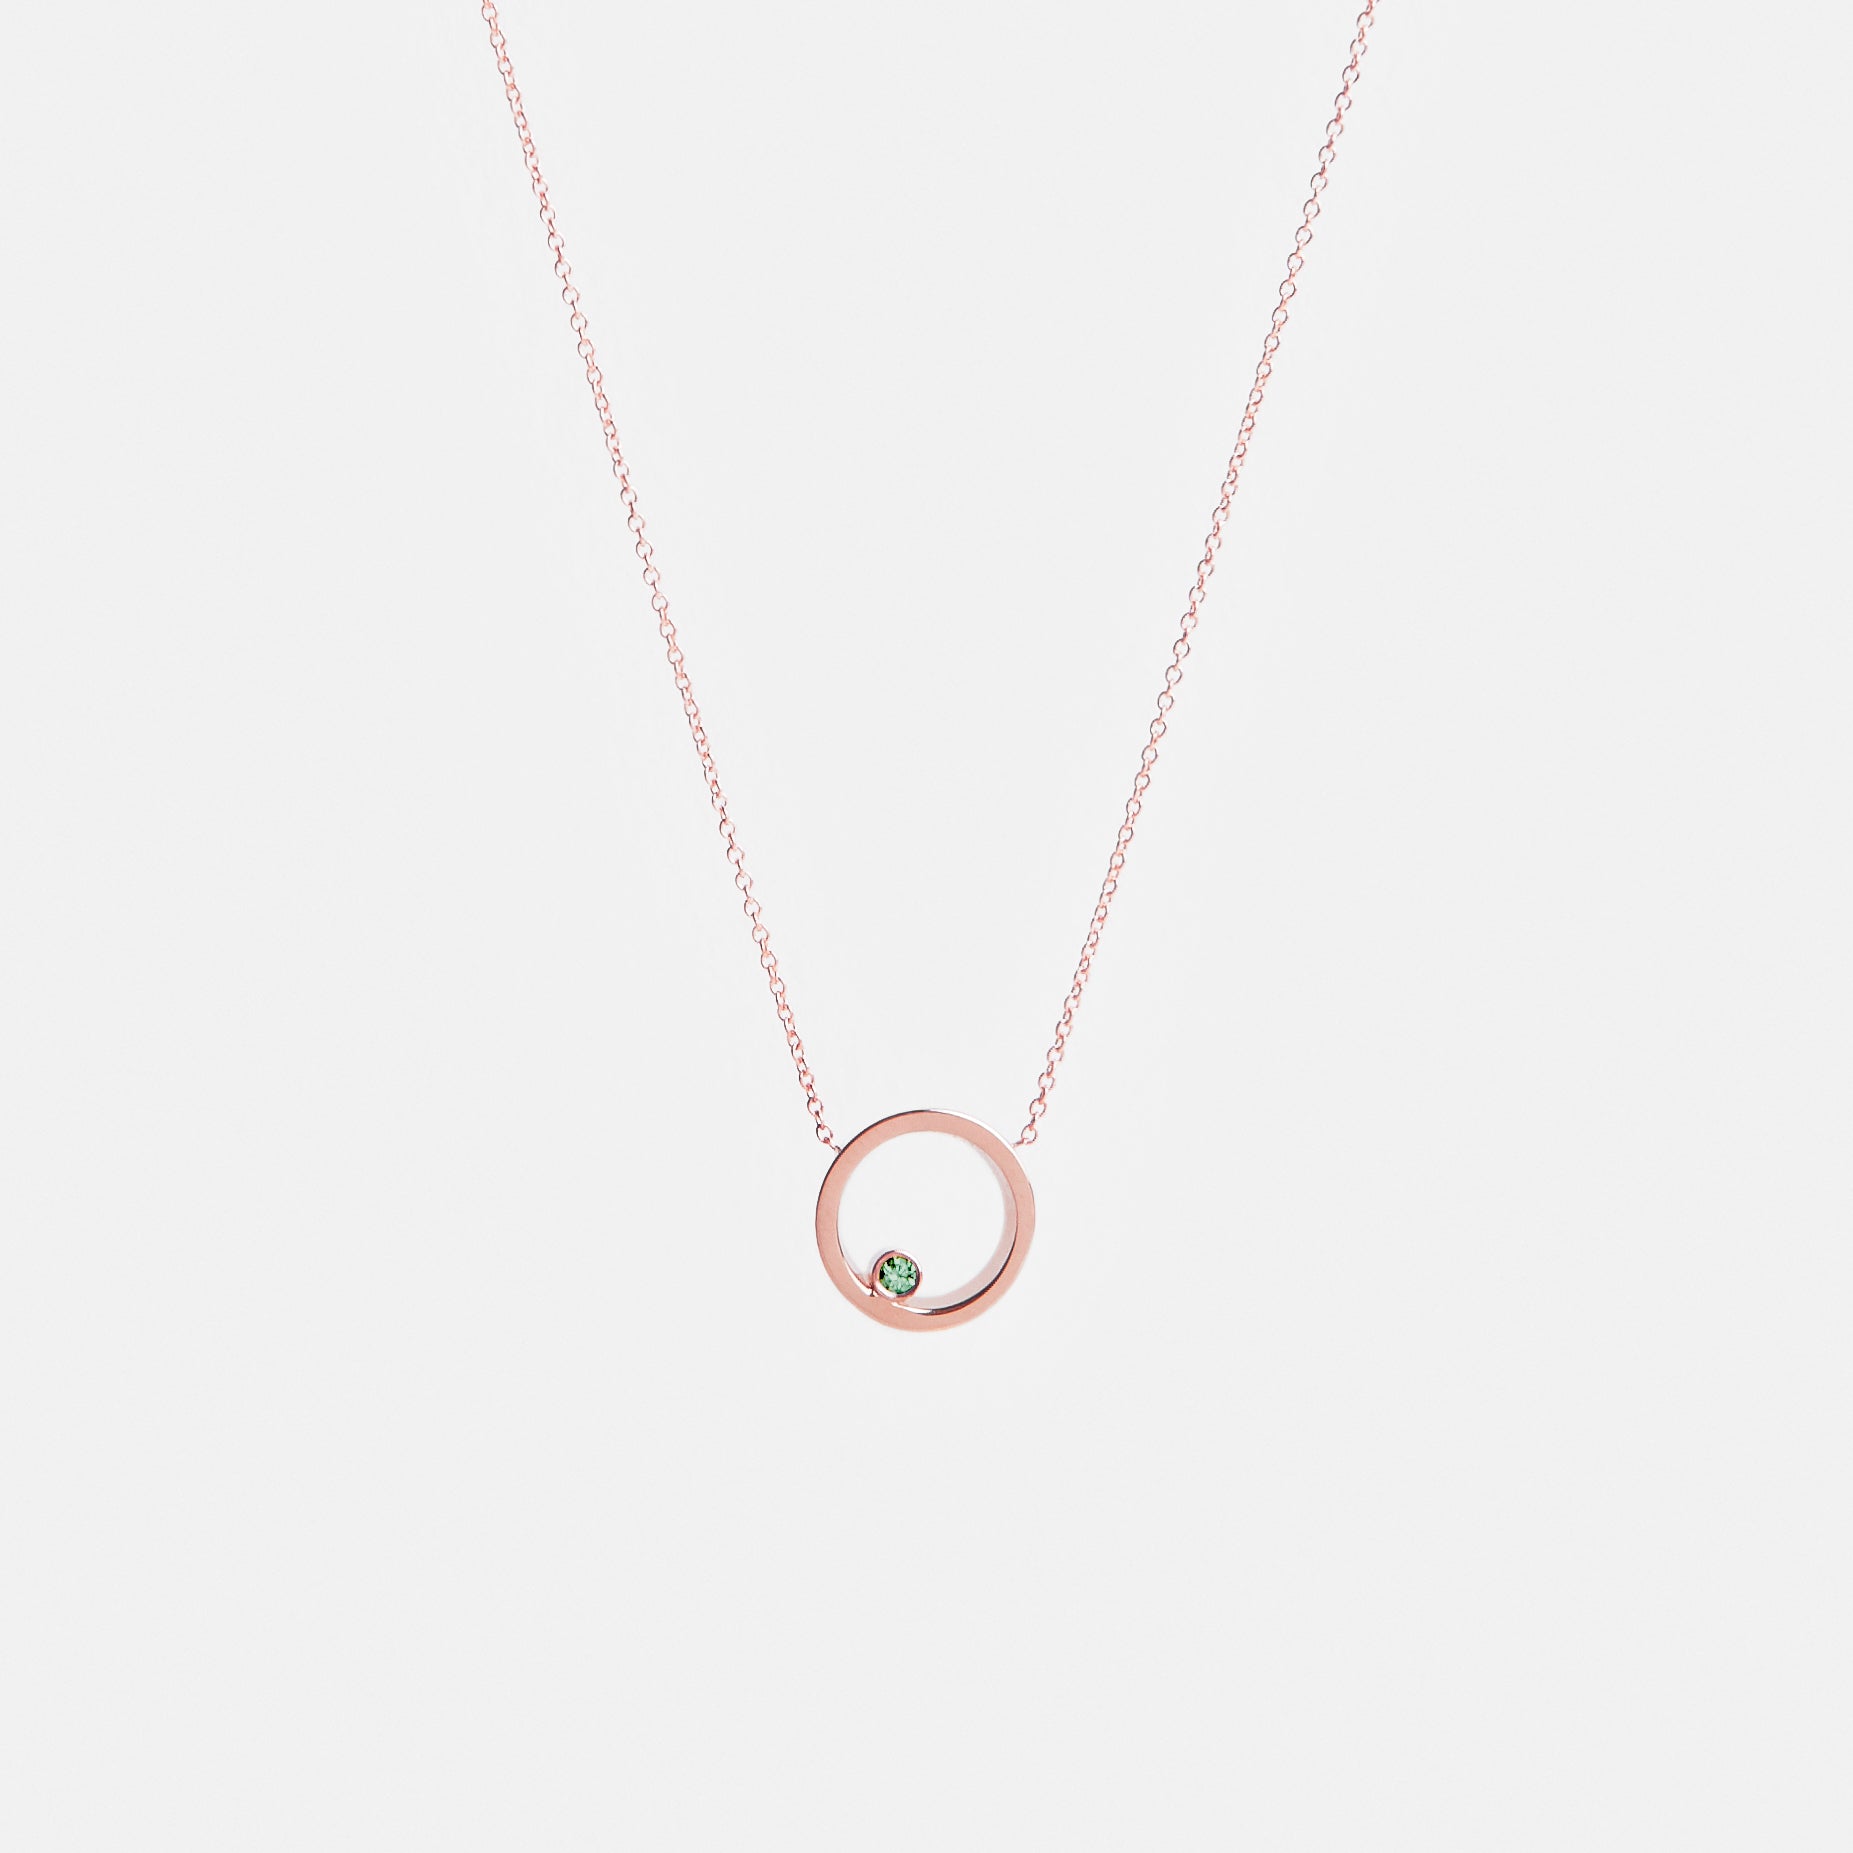 Ila Cool Necklace in 14k Rose Gold set with White Diamond By SHW Fine Jewelry NYC